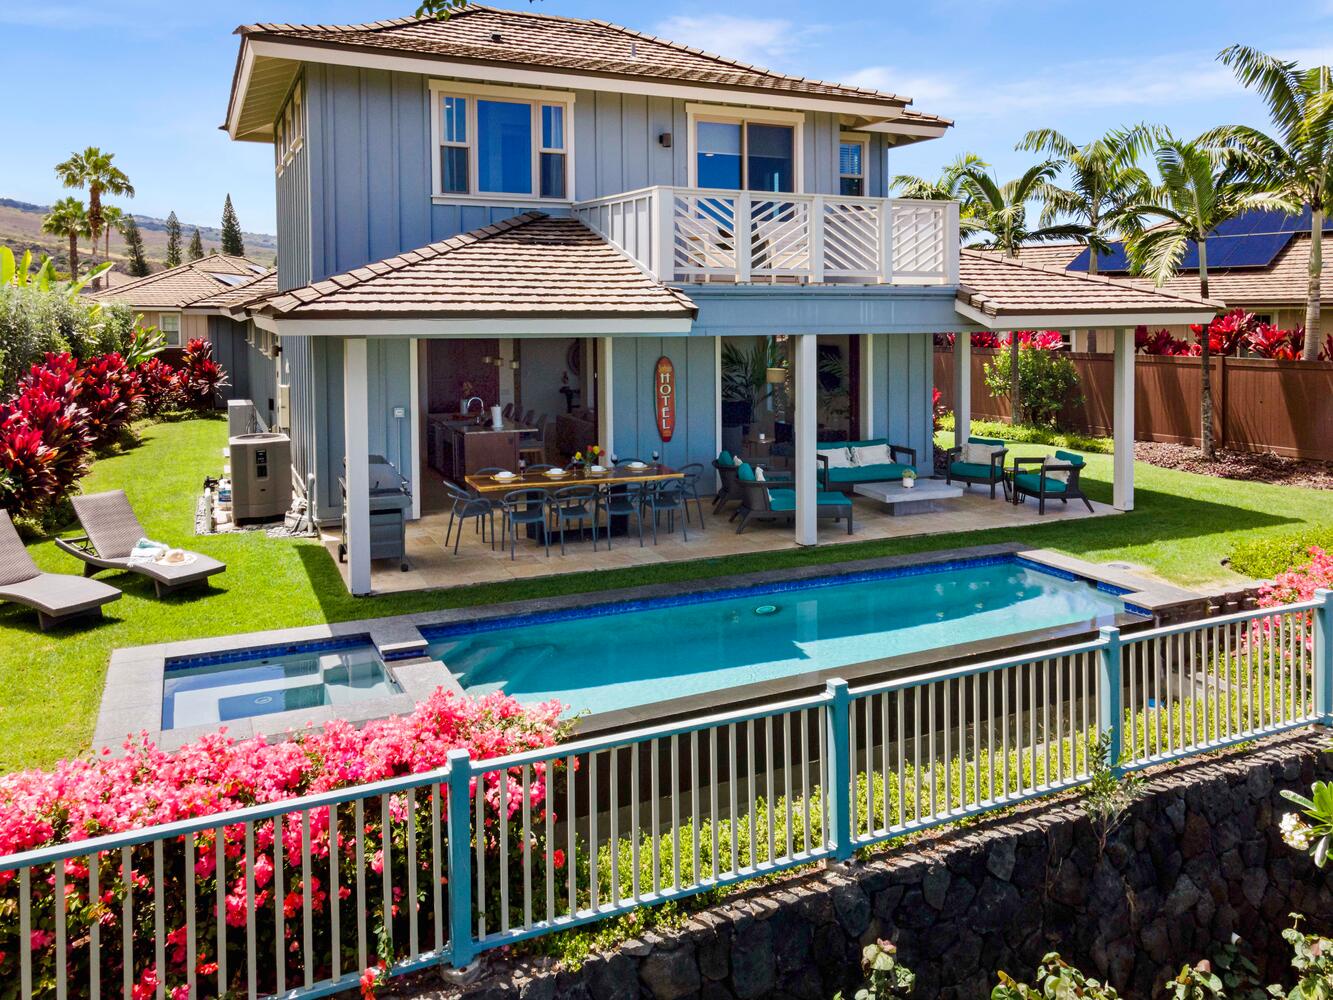 Kailua-Kona Vacation Rentals, Holua Kai #26 - Relax in this luxurious family home, featuring expansive outdoor living spaces with a pool and scenic views.